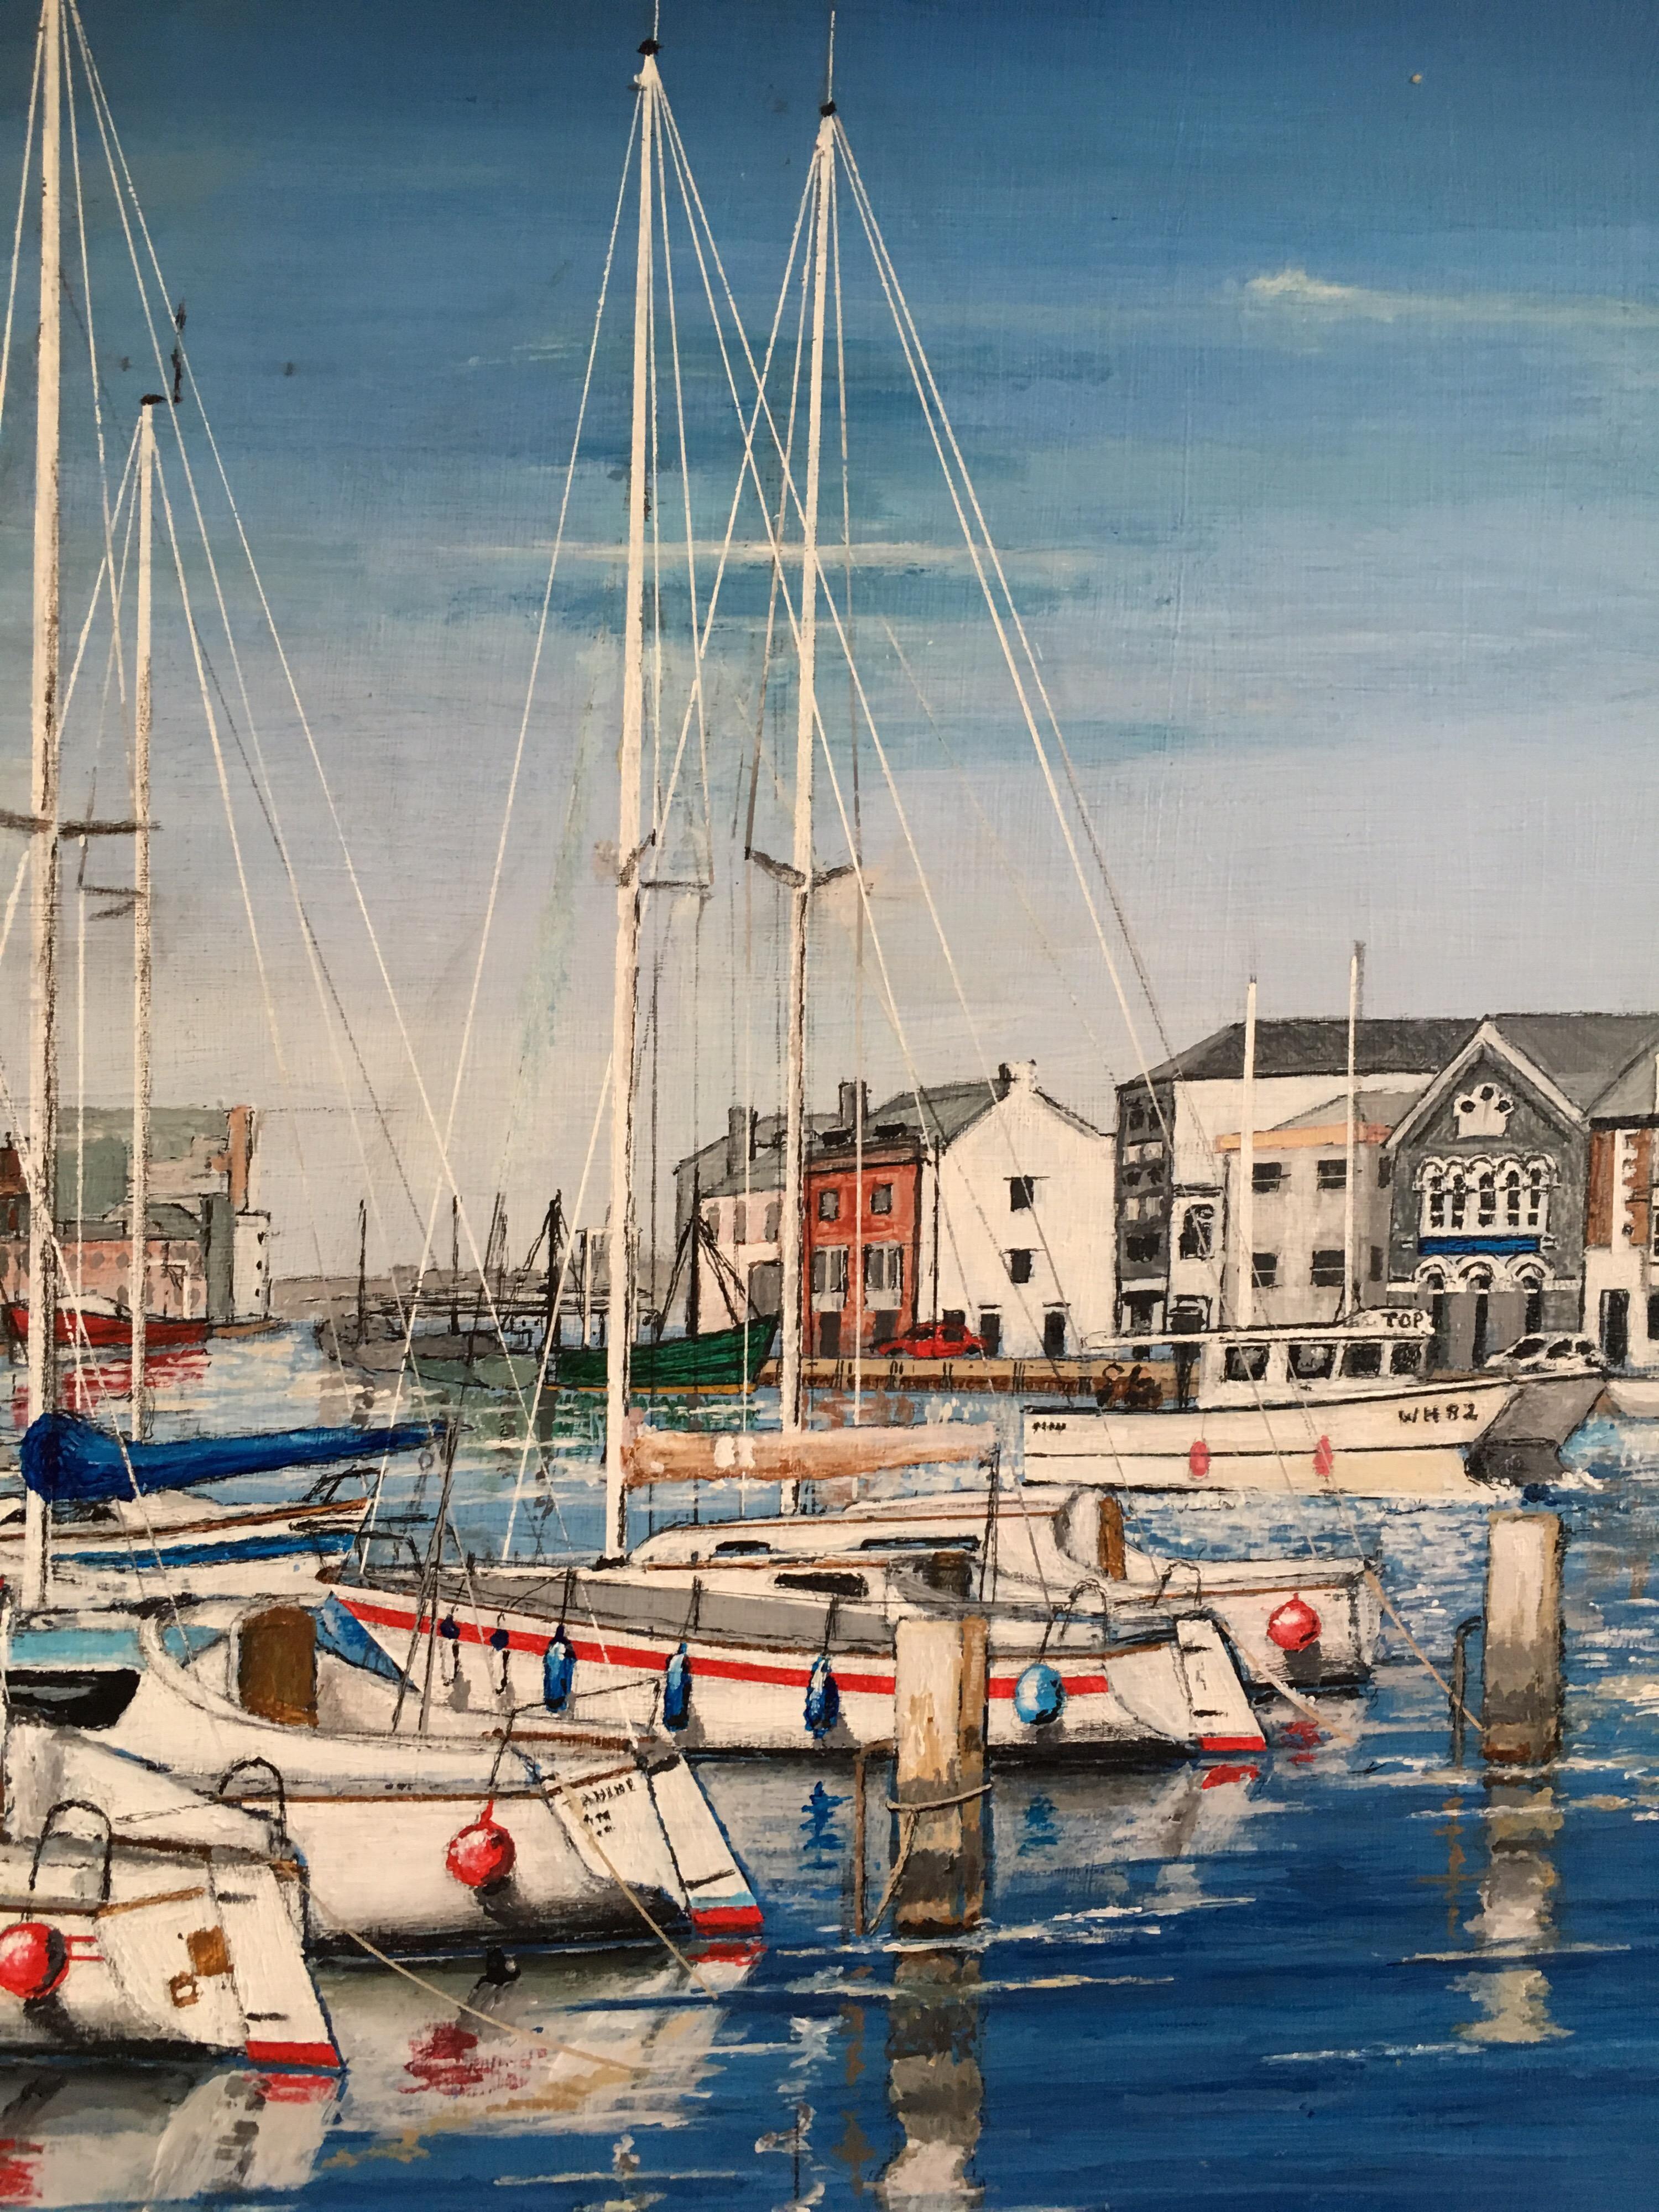 Yachts in Harbour, Nautical Themed Landscape Large Signed Oil Painting - Gray Landscape Painting by Peter Nichols